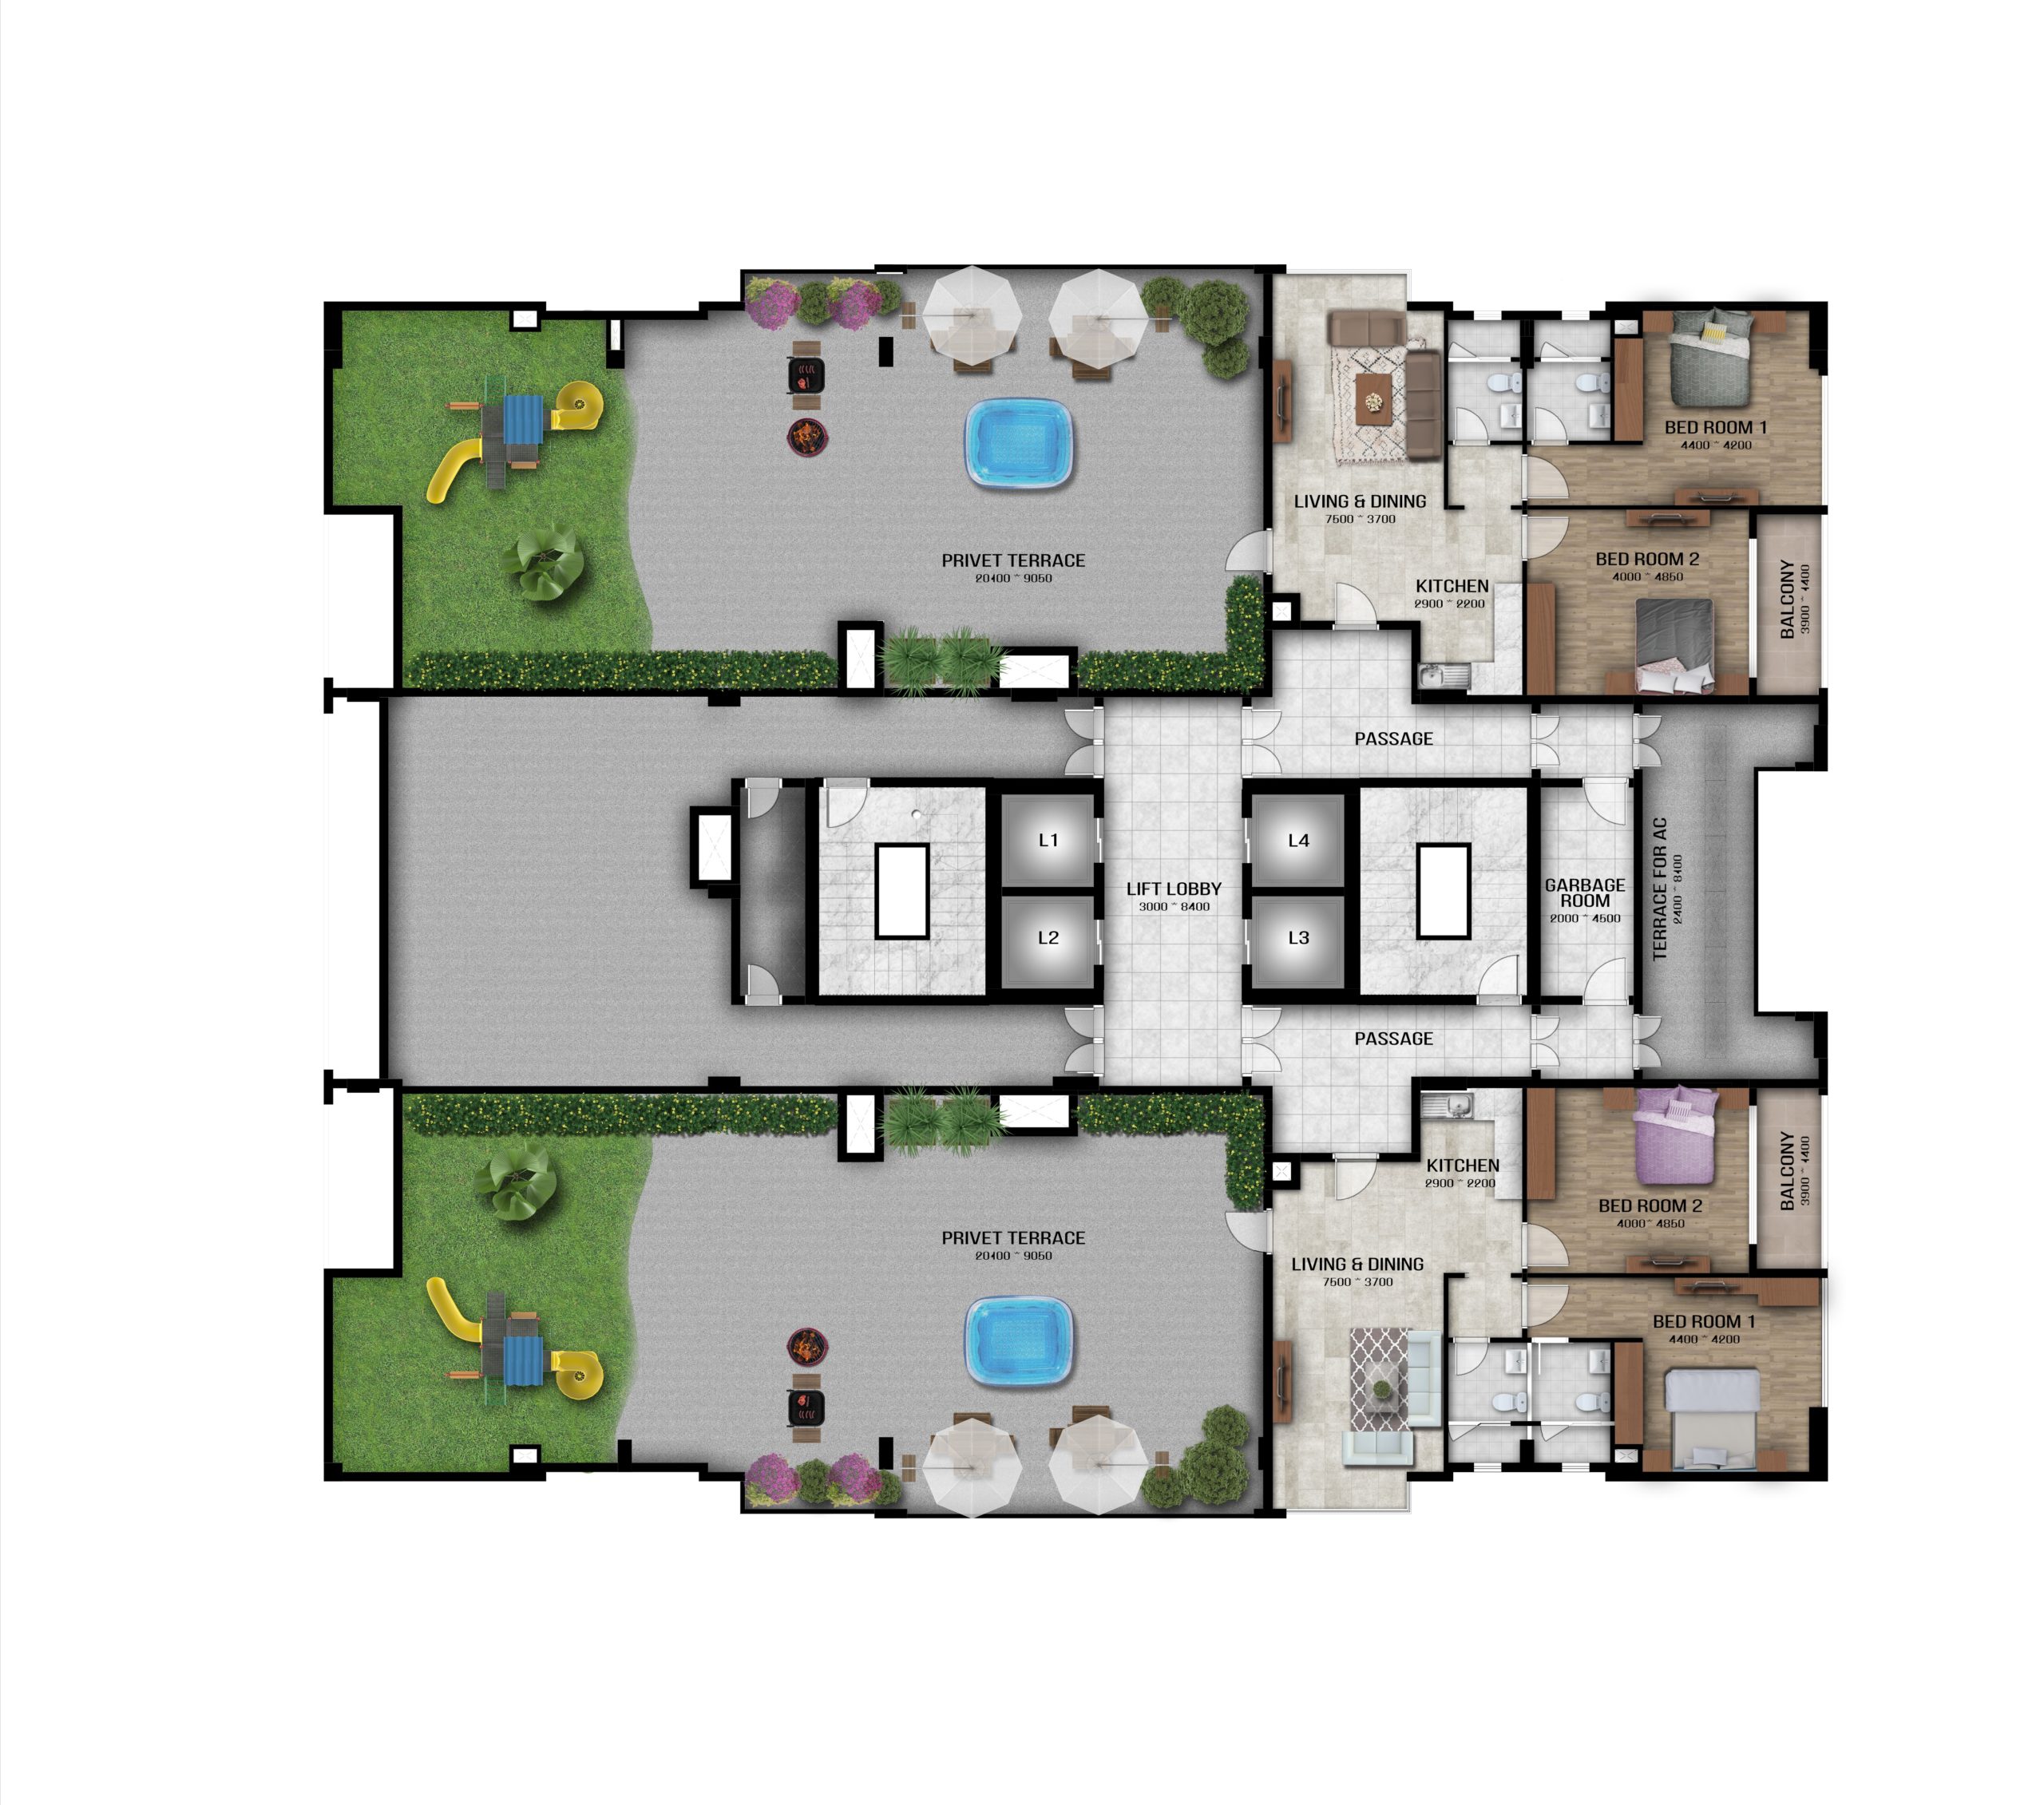 Memaar floor plan for a two-bedroom apartment with living room.